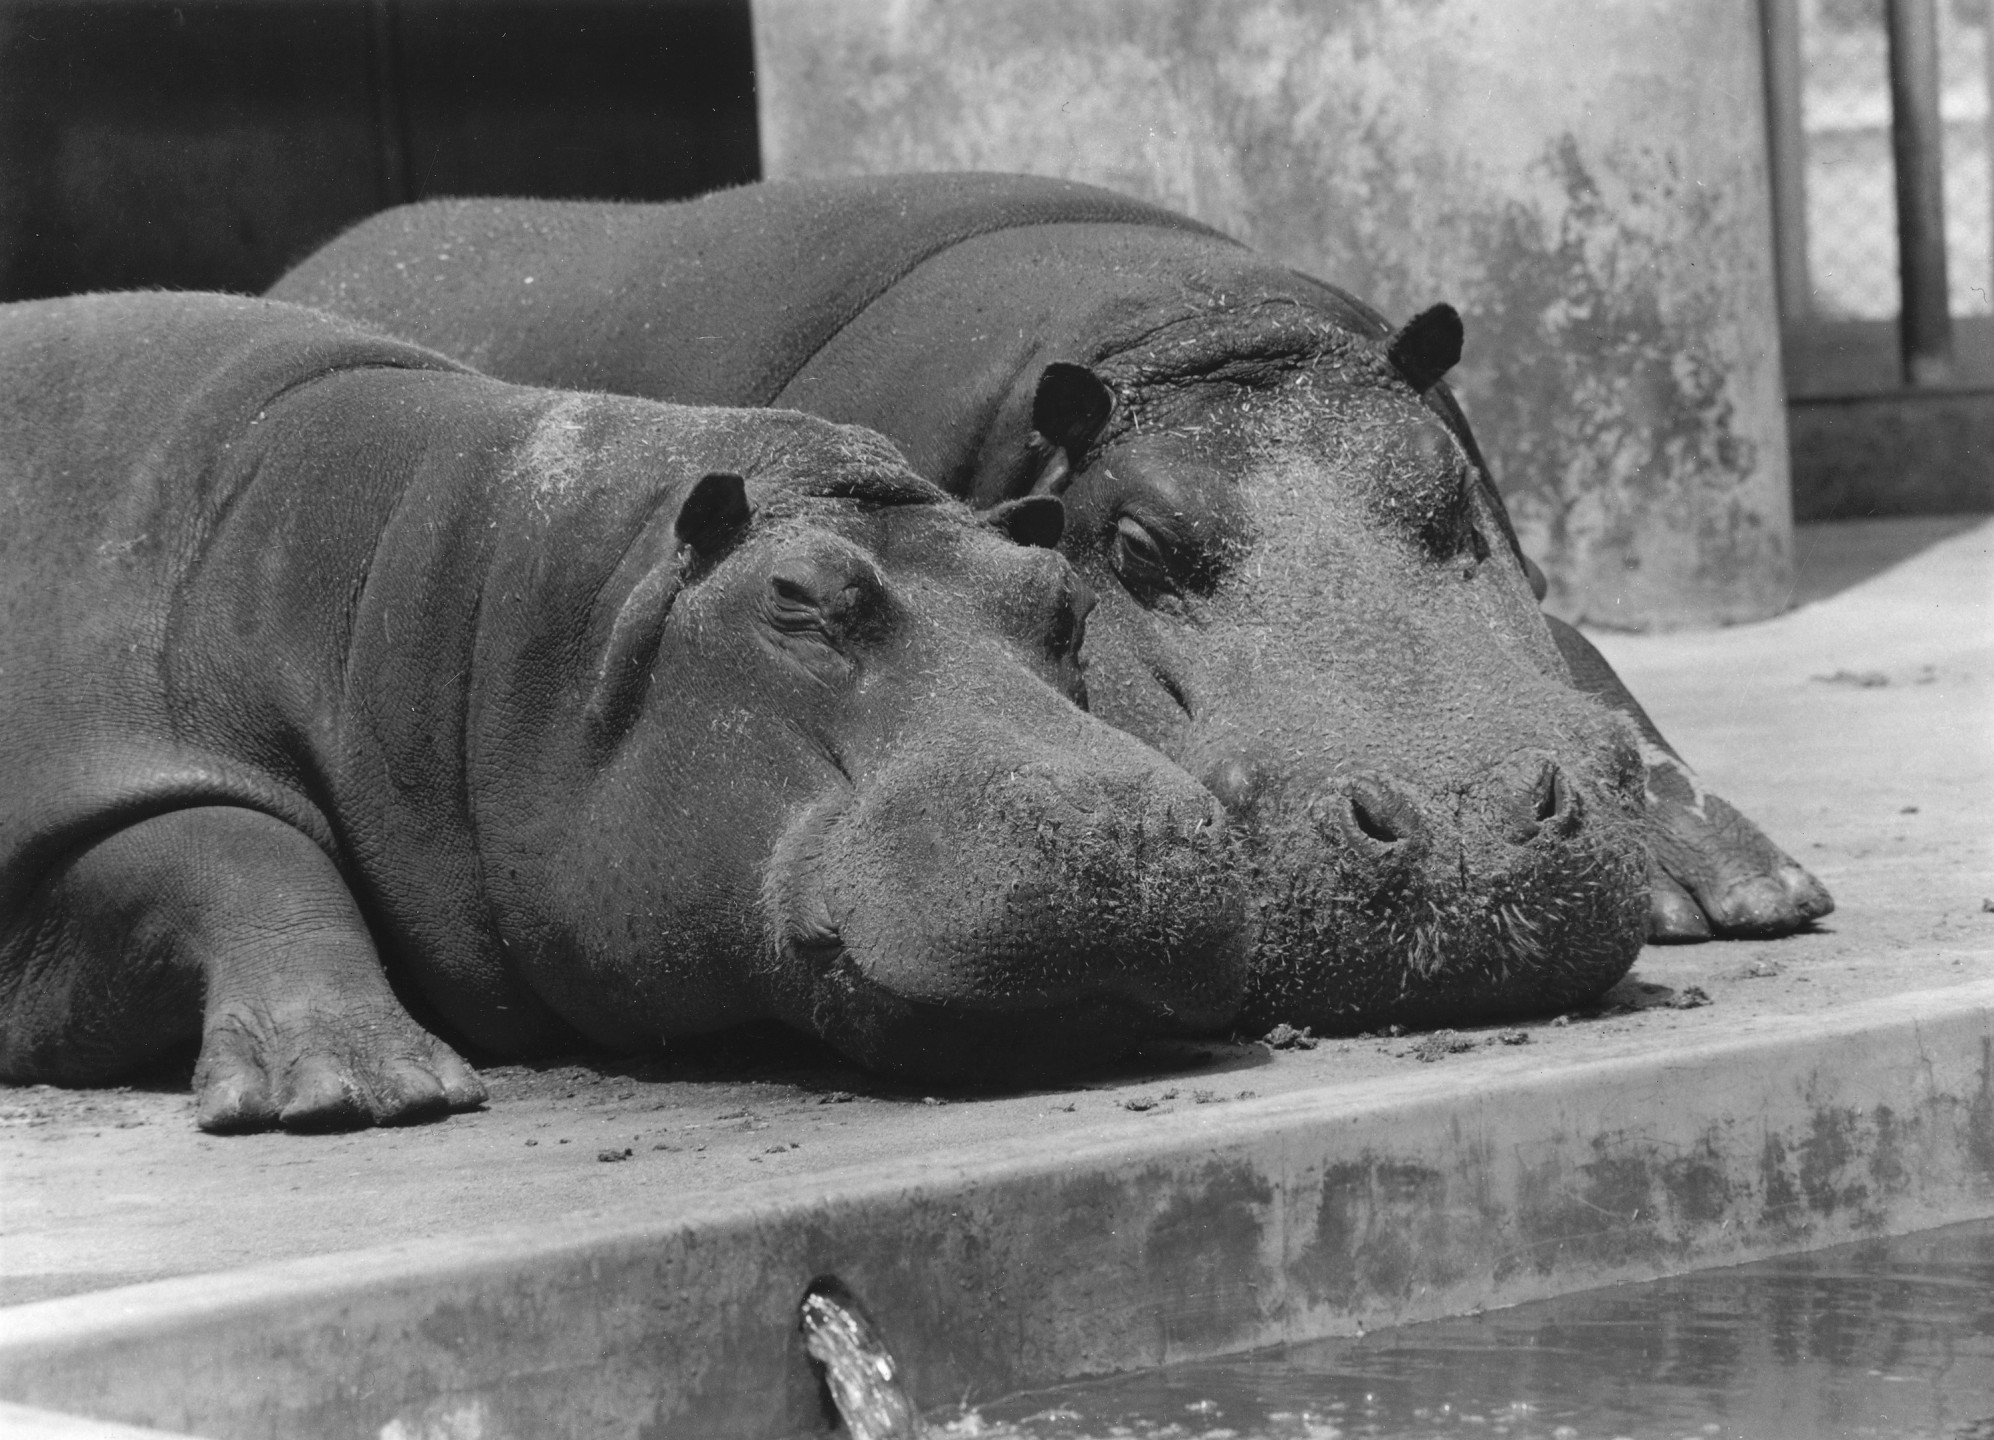 Rubie and Rube, a pair of river hippos, were among the animals that arrived in the 1940 shipment. This charismatic couple would live at the Zoo for many years, raising several calves and delighting their many fans.